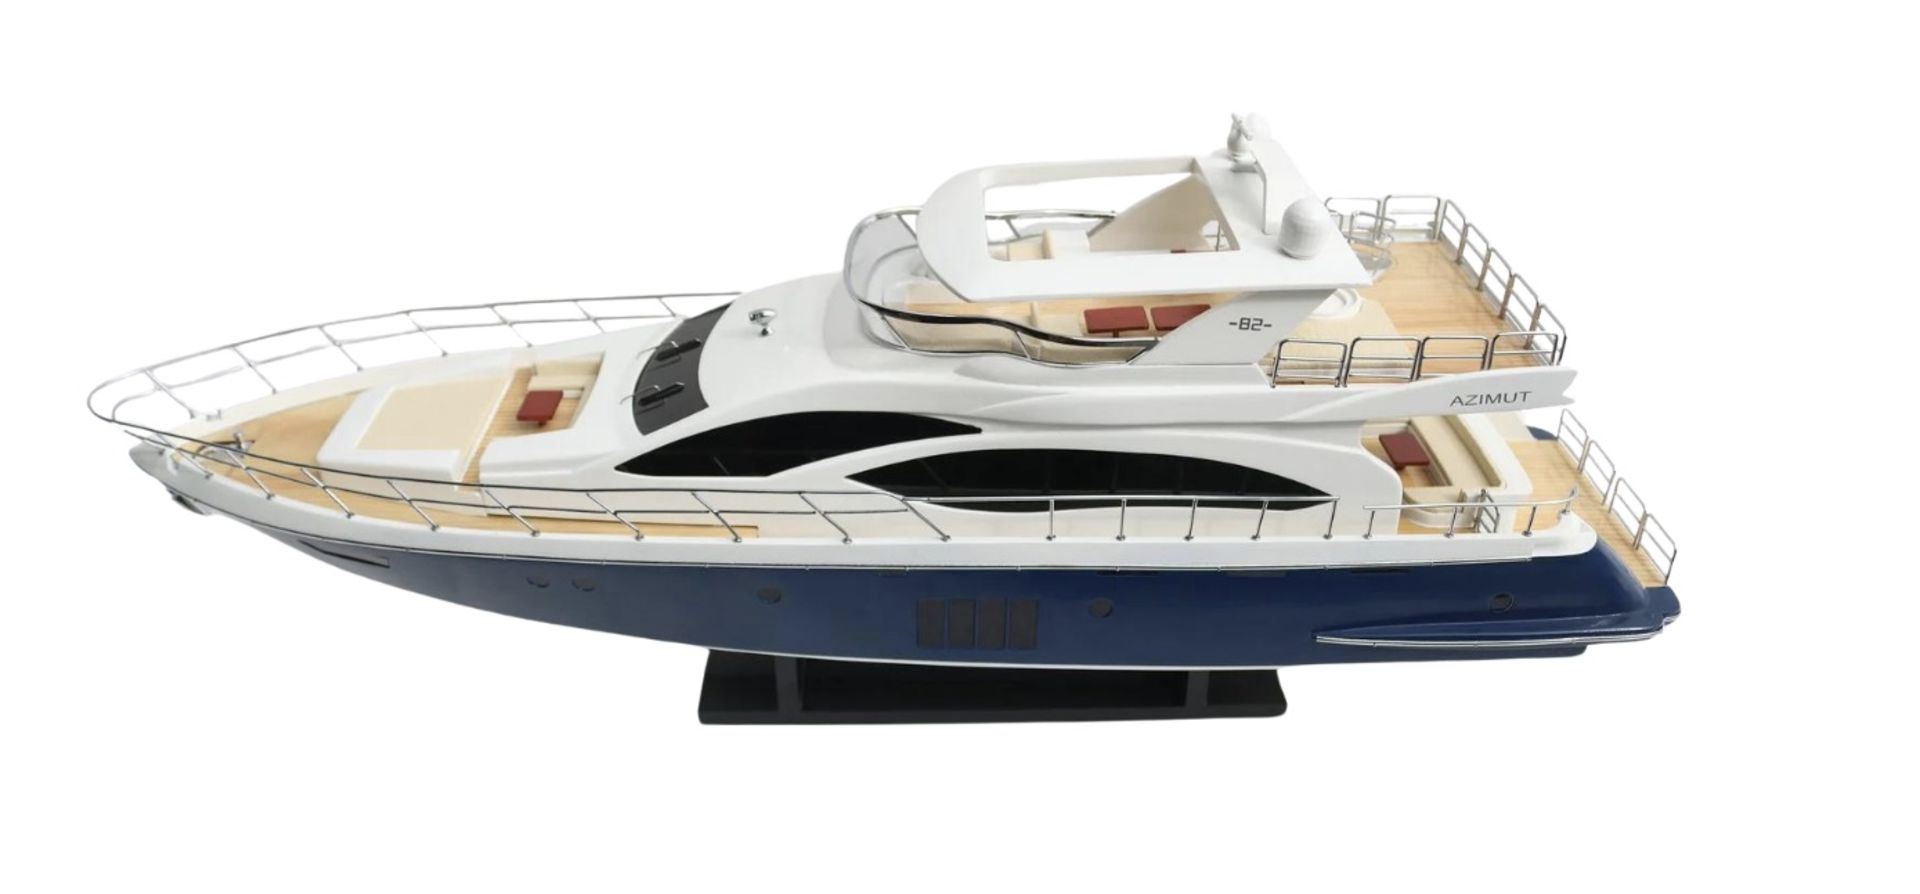 Azimut 82 Yacht Wooden Scale Desk Display Model - Image 3 of 10